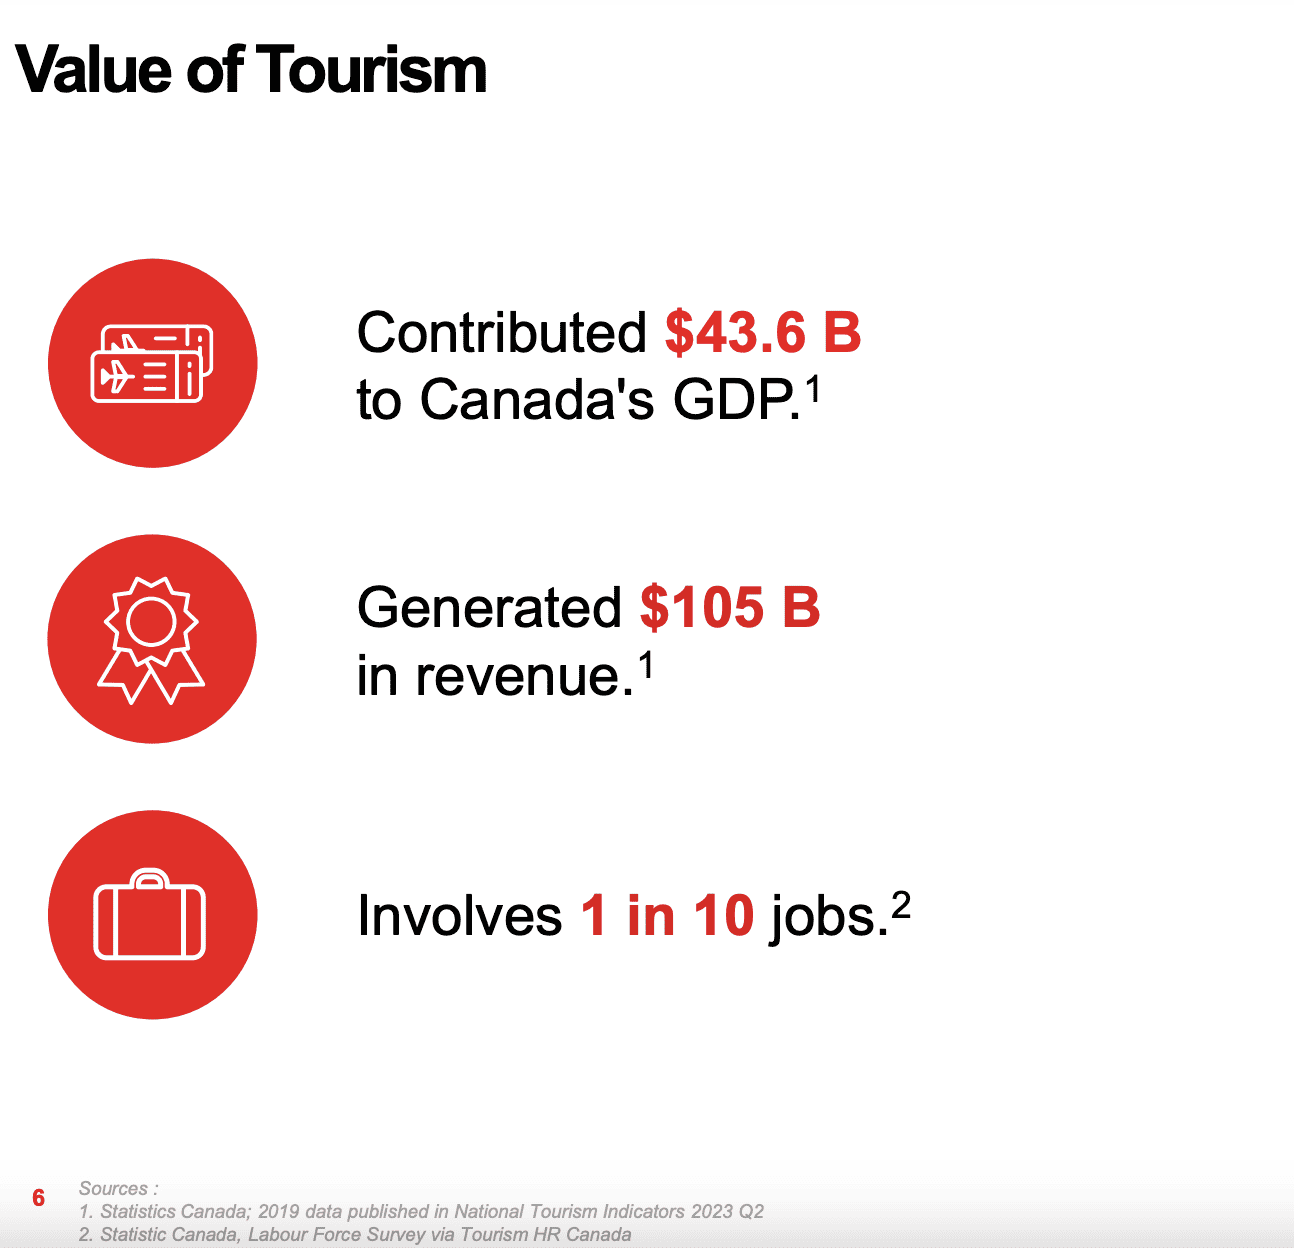 Value of tourism in Canada